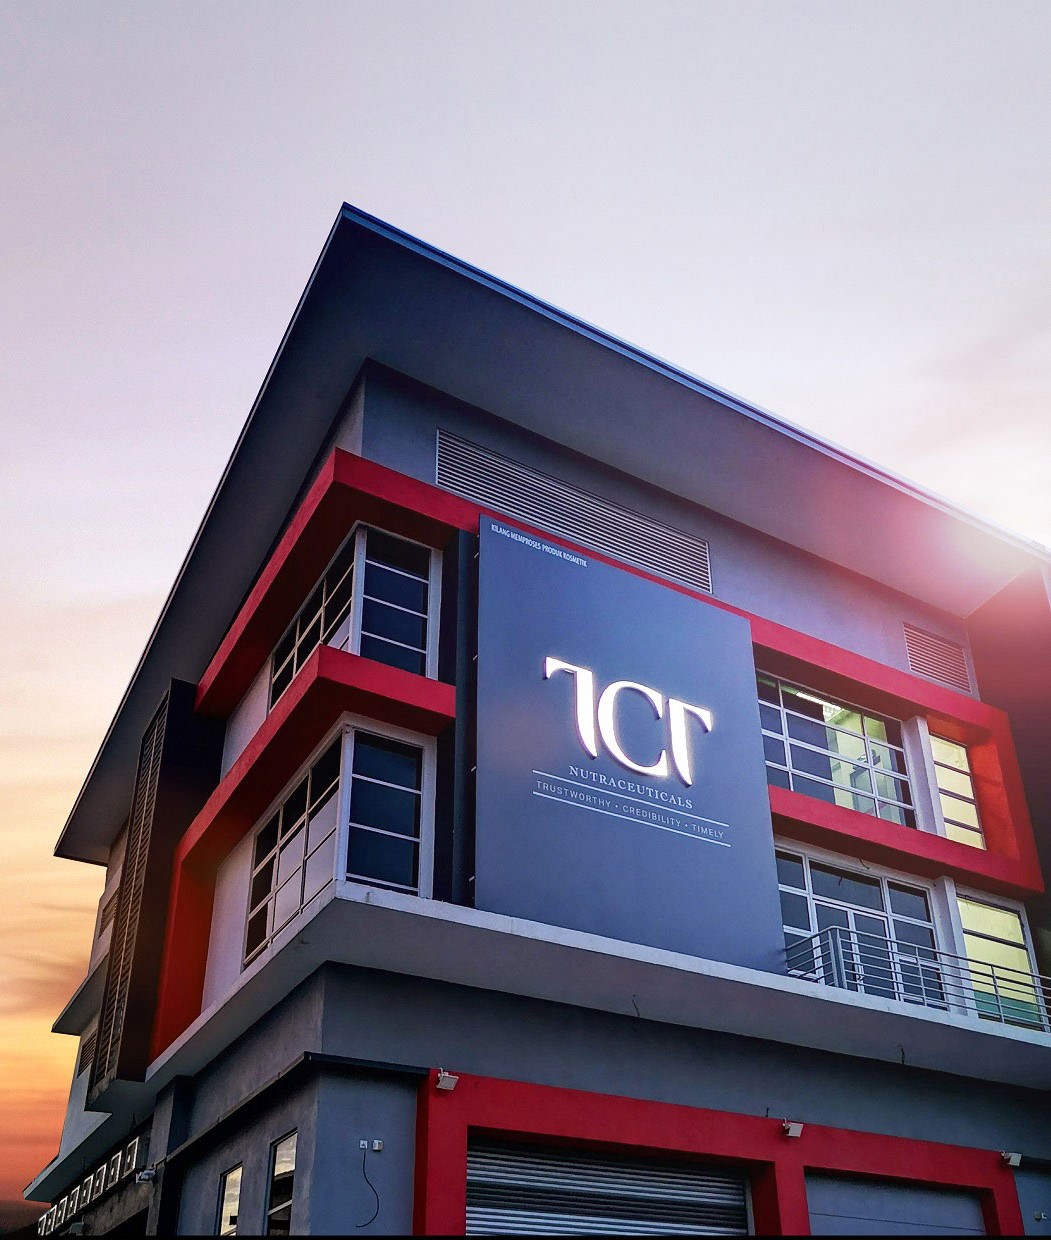 Office of TCT Nutraceuticals